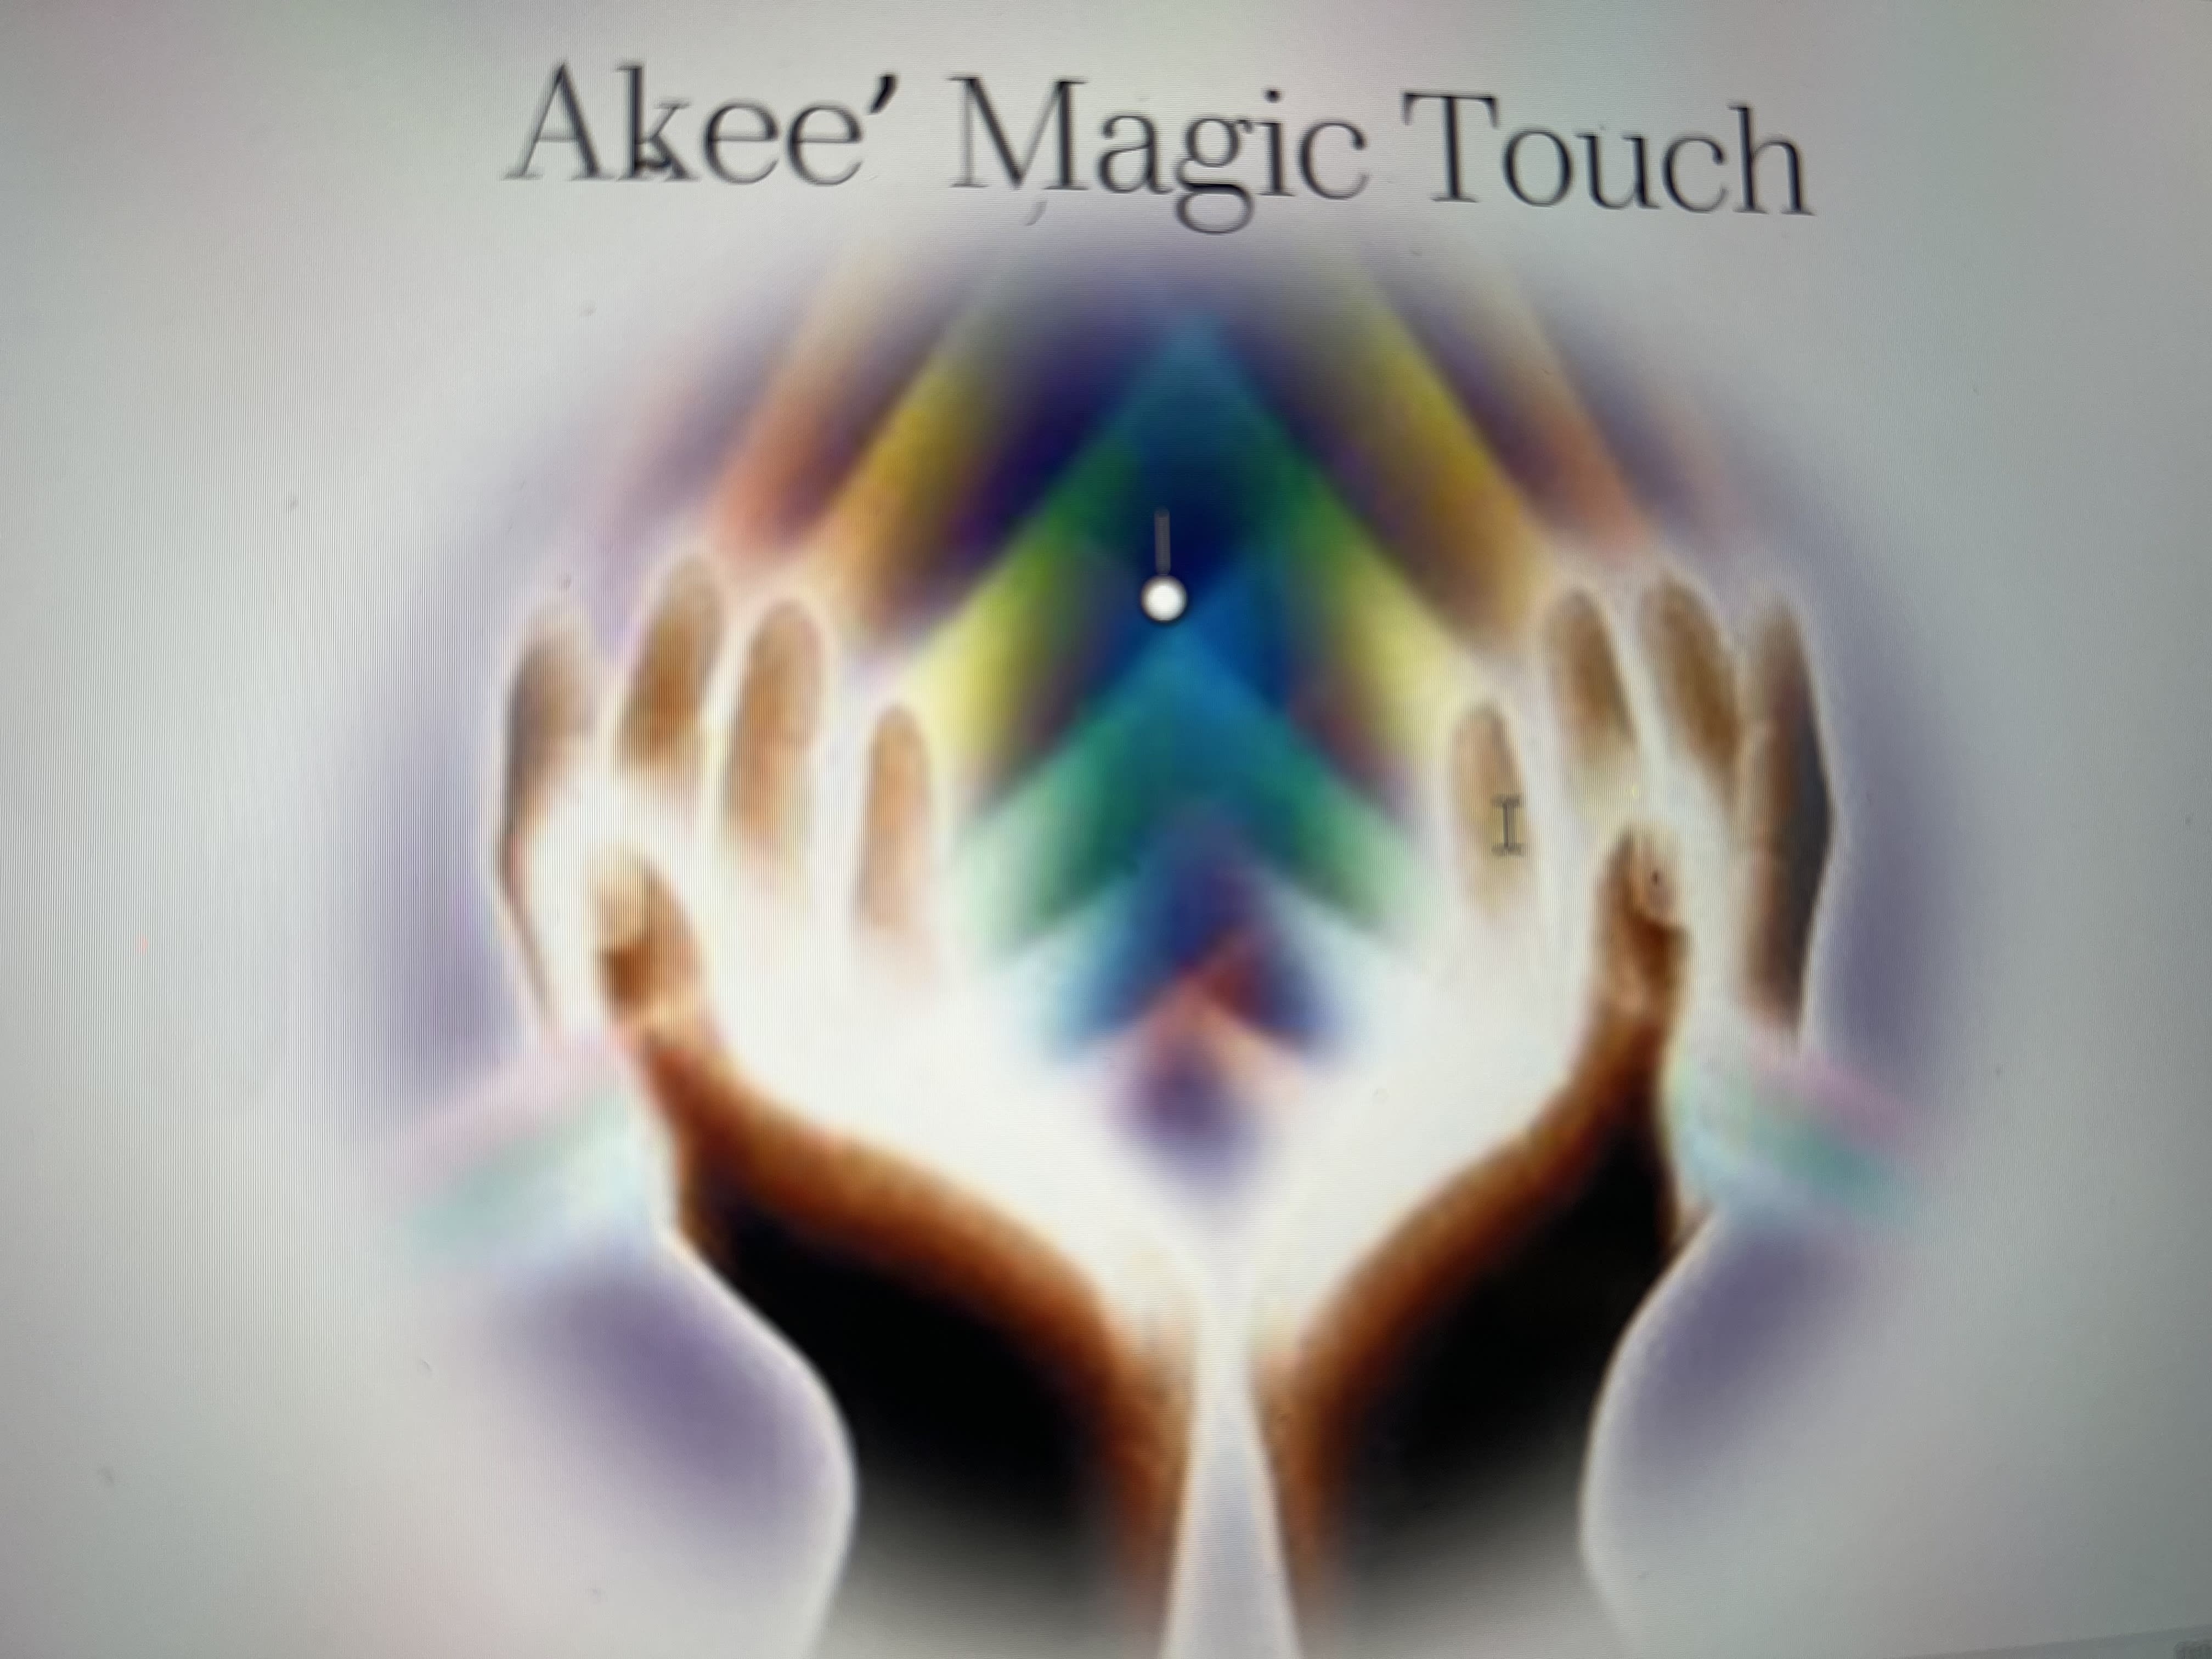 Akee' Magic Touch